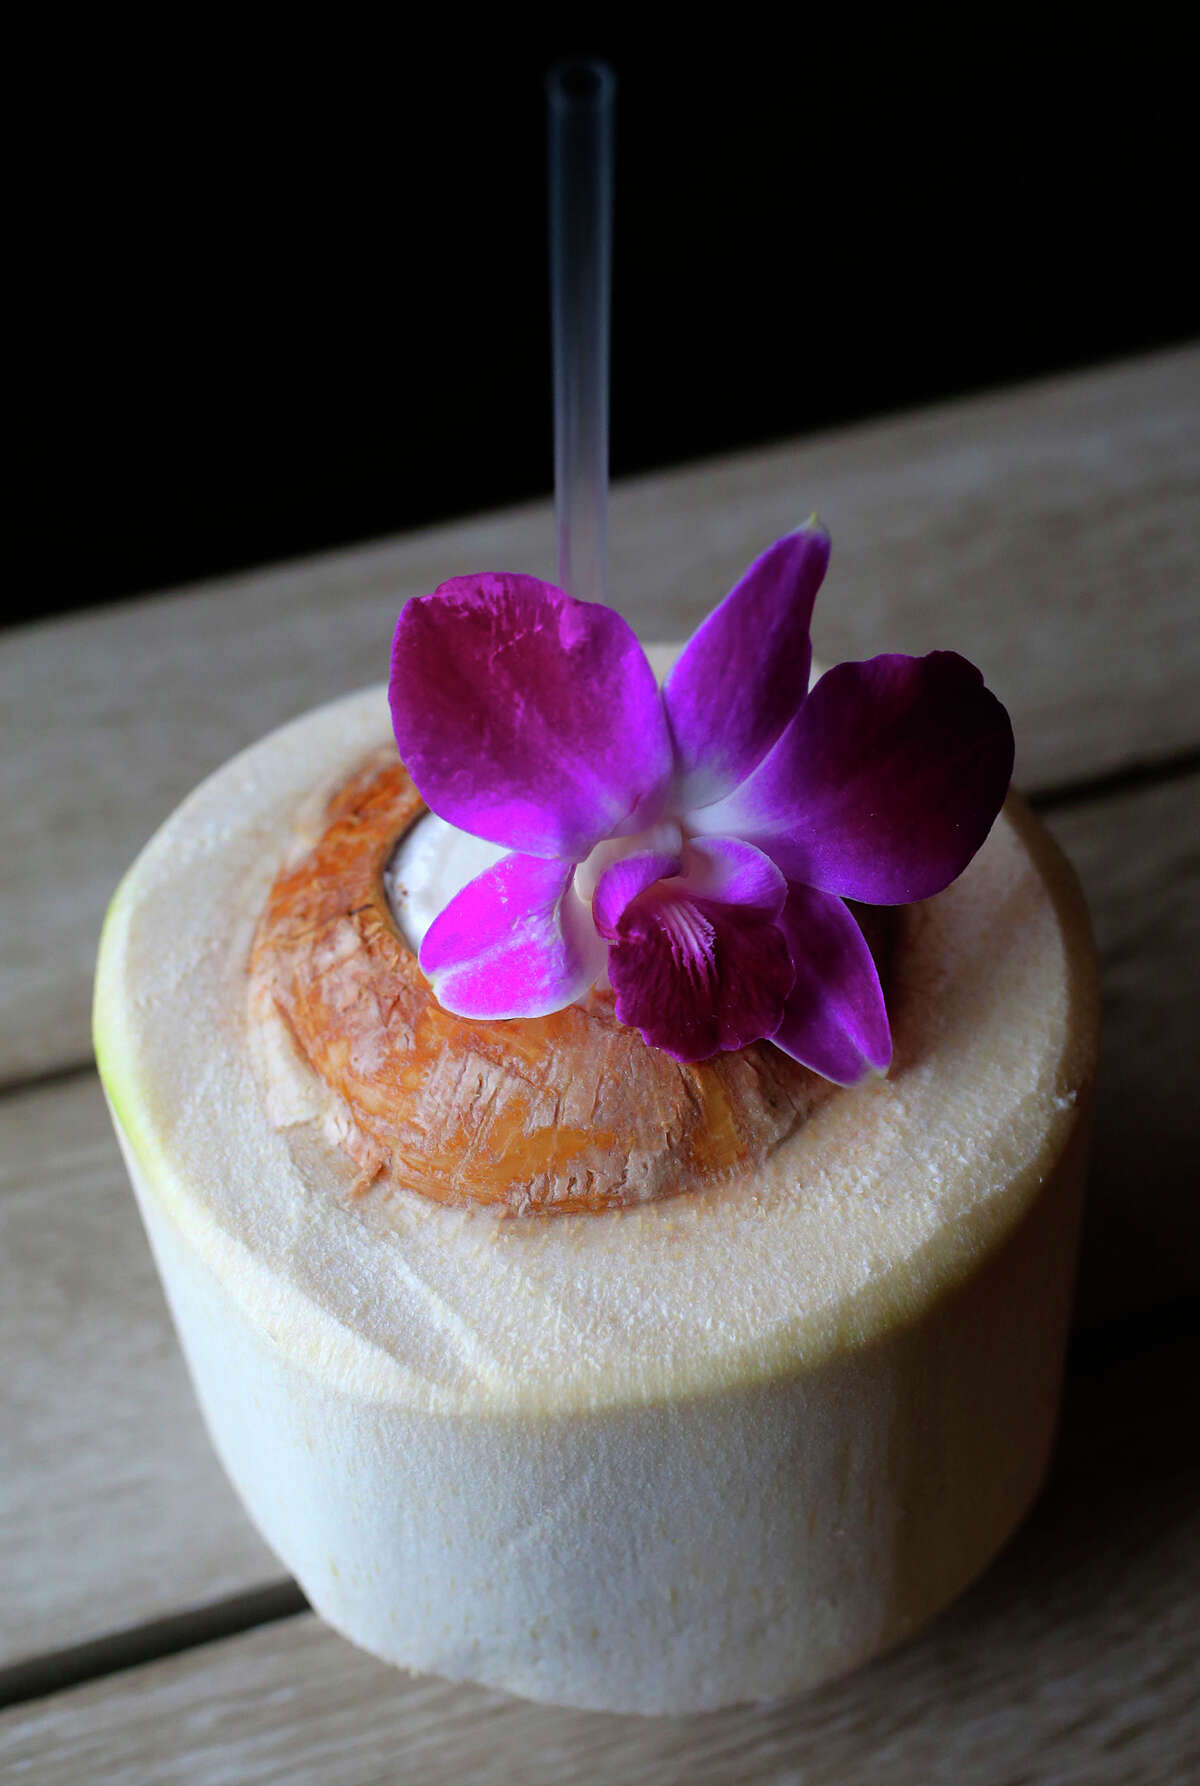 Fresh coconuts are chopped to order at Baan Esaan.